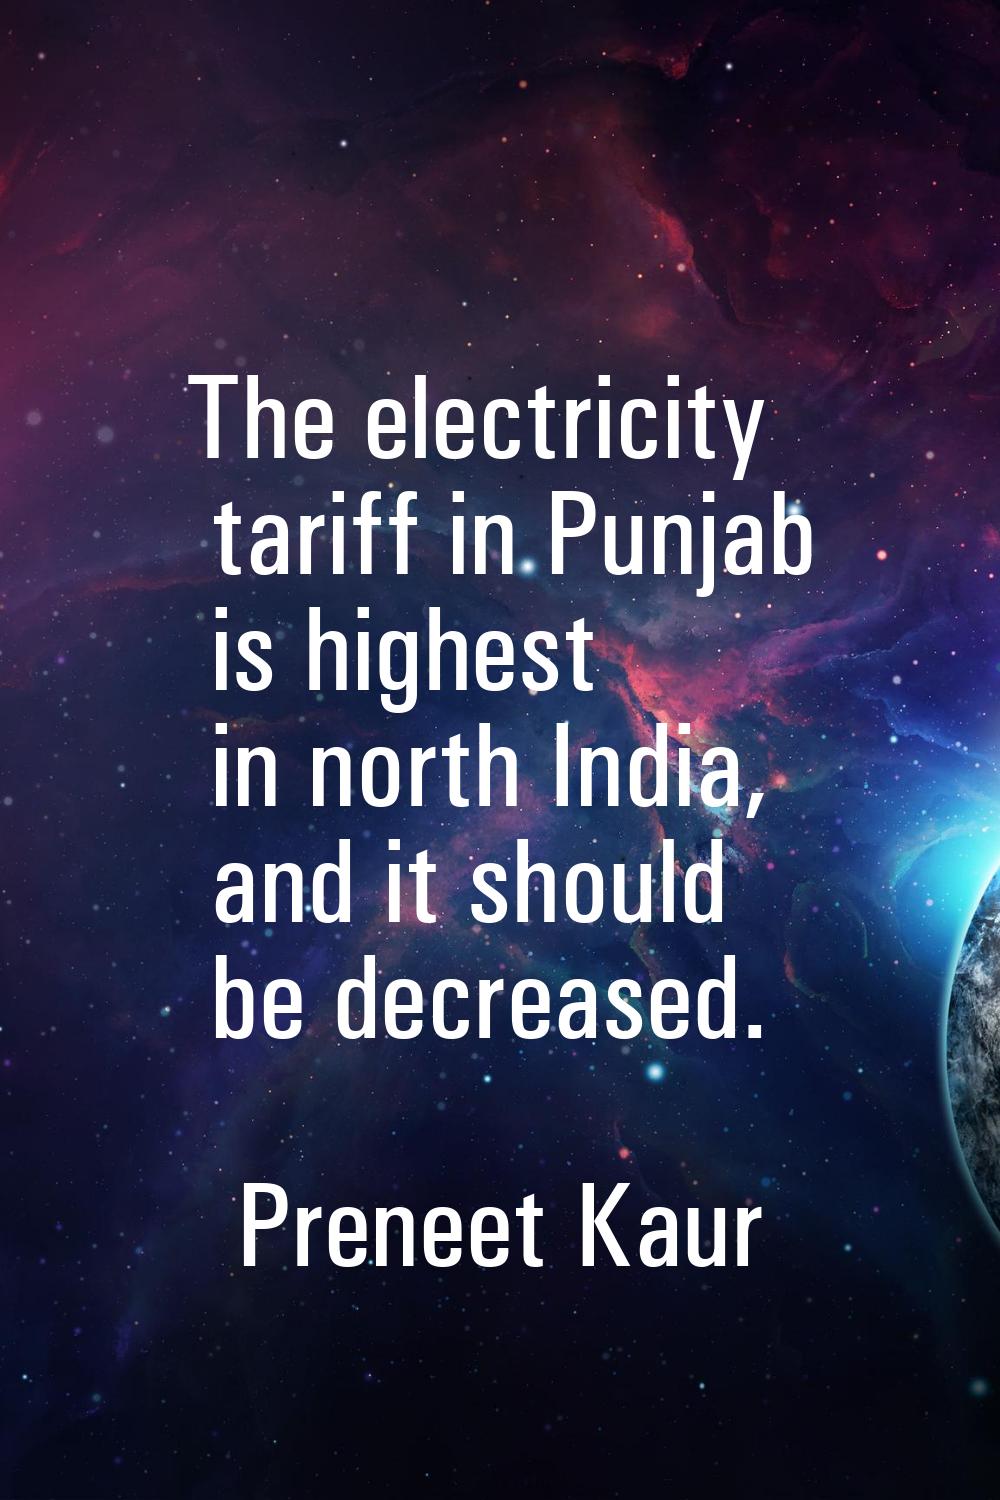 The electricity tariff in Punjab is highest in north India, and it should be decreased.